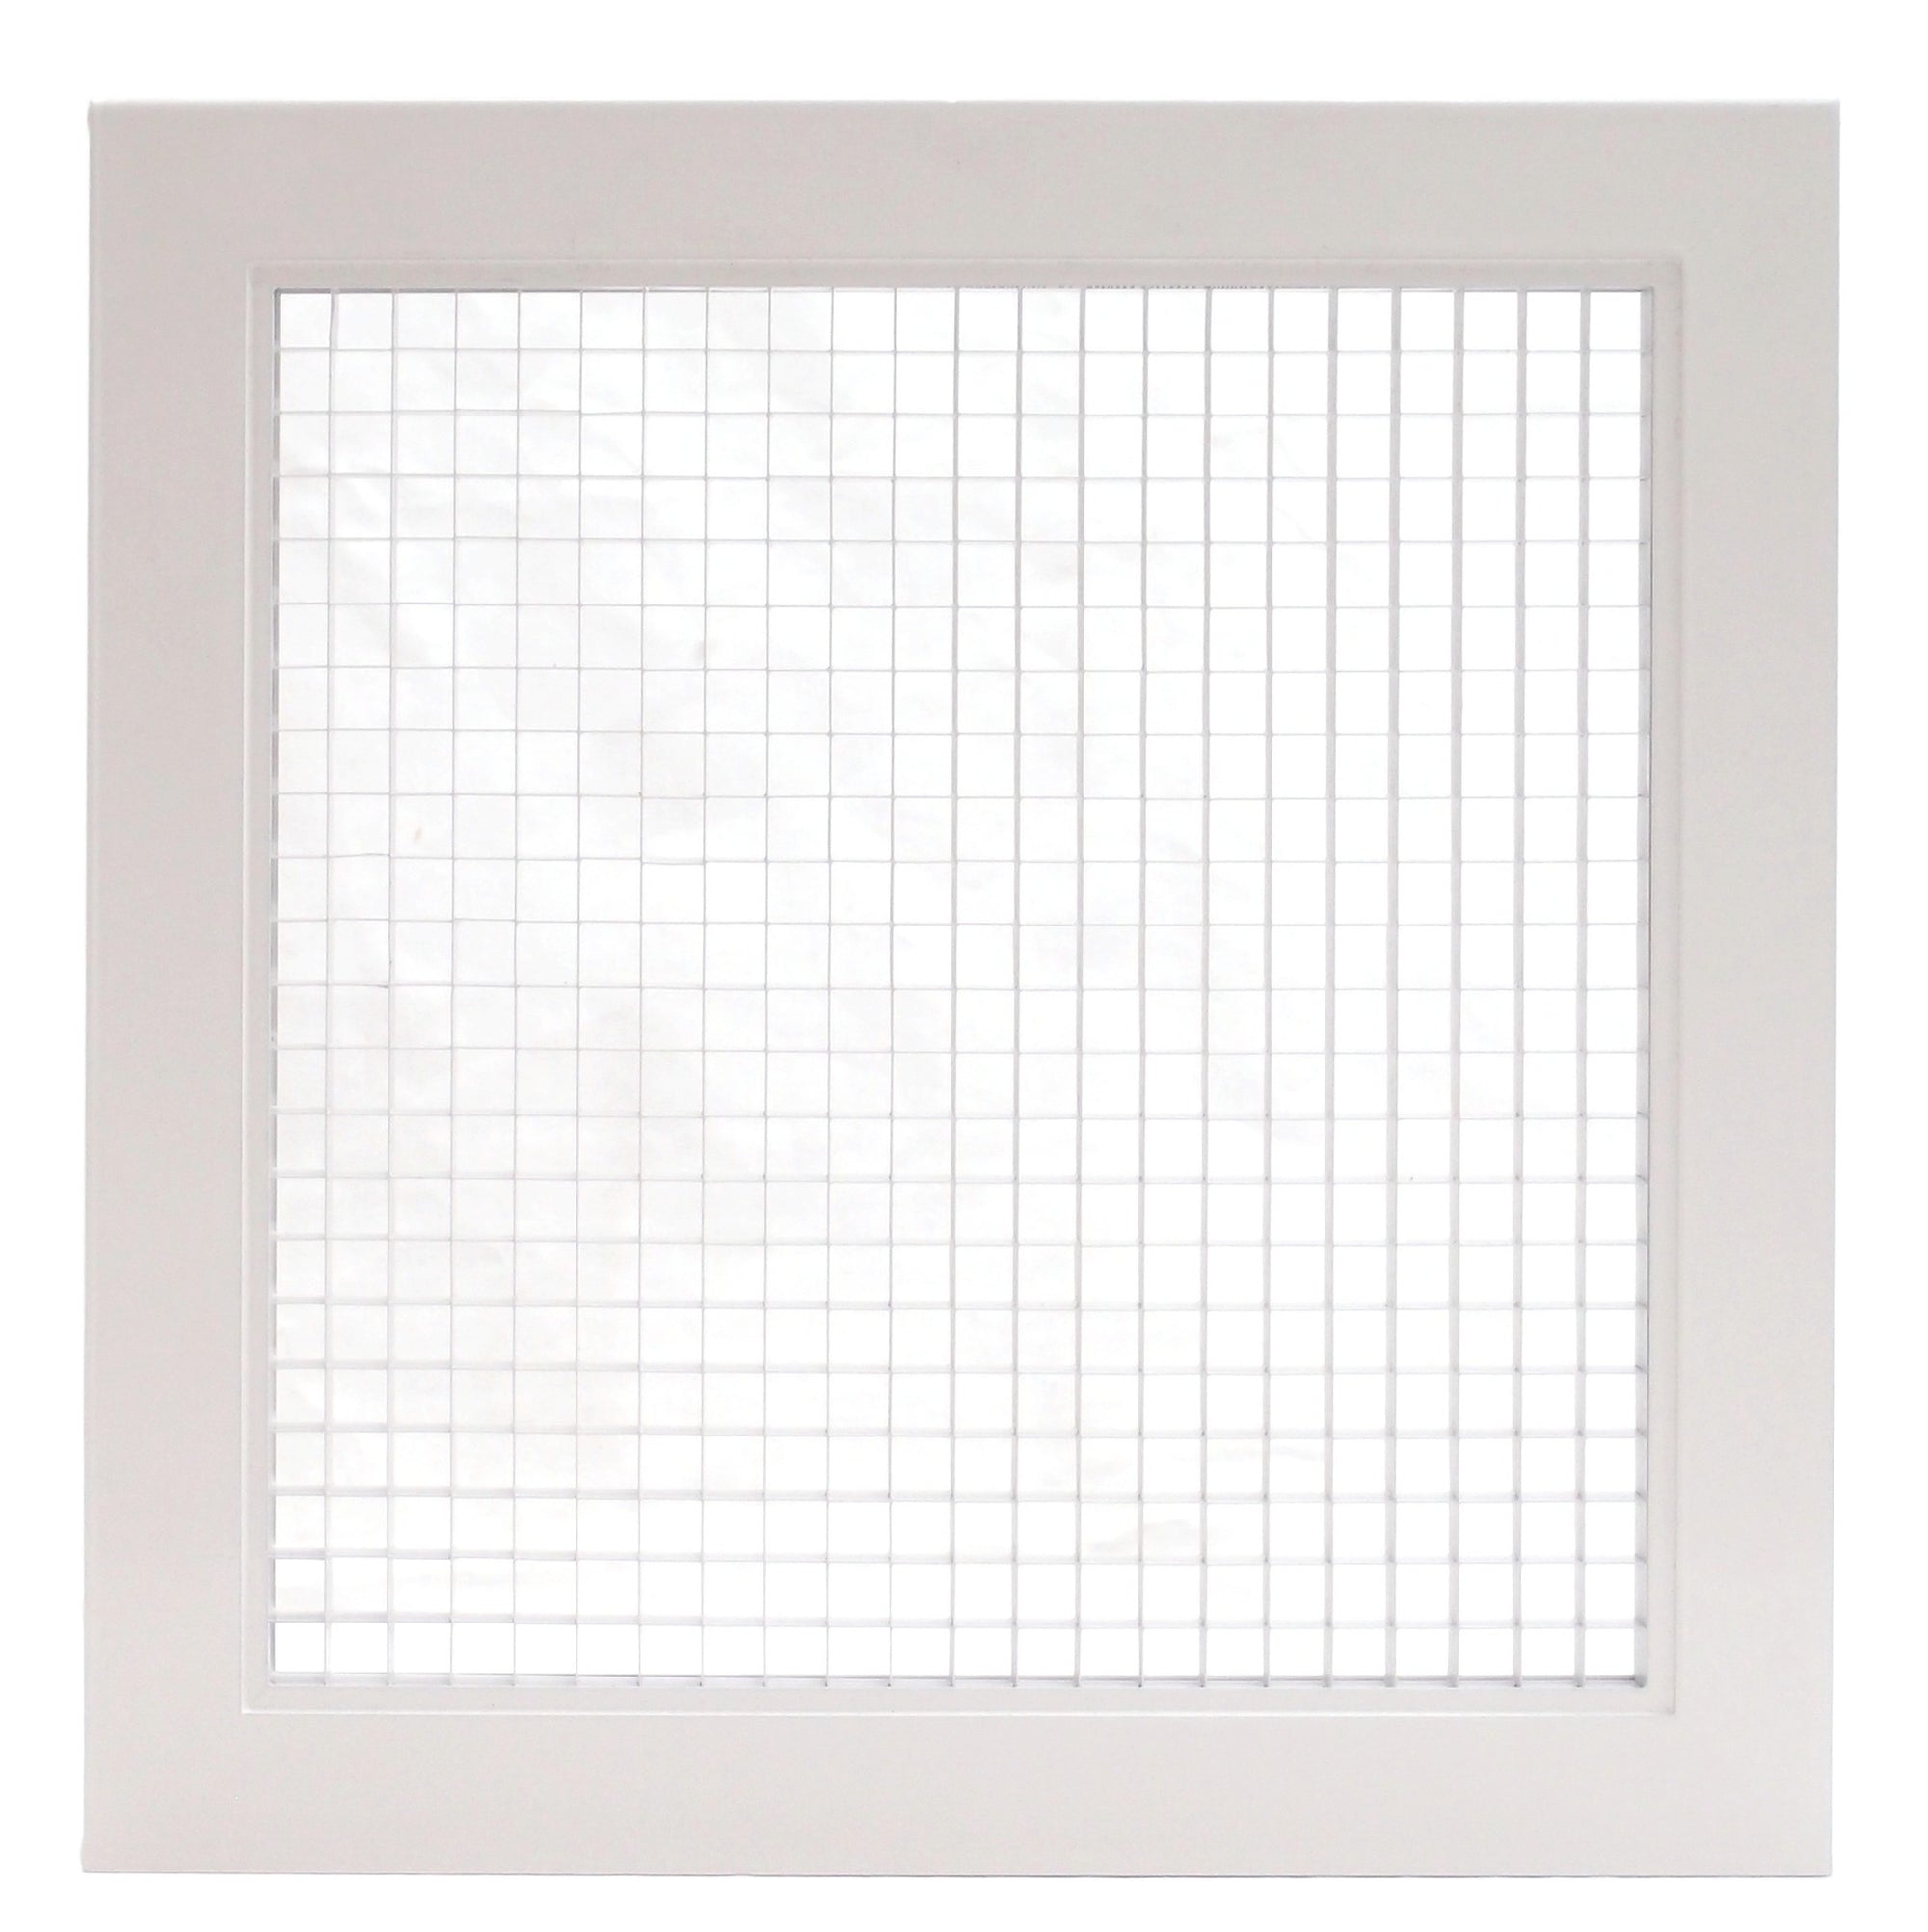 32" x 8" Cube Core Eggcrate Return Air Filter Grille for 1" Filter